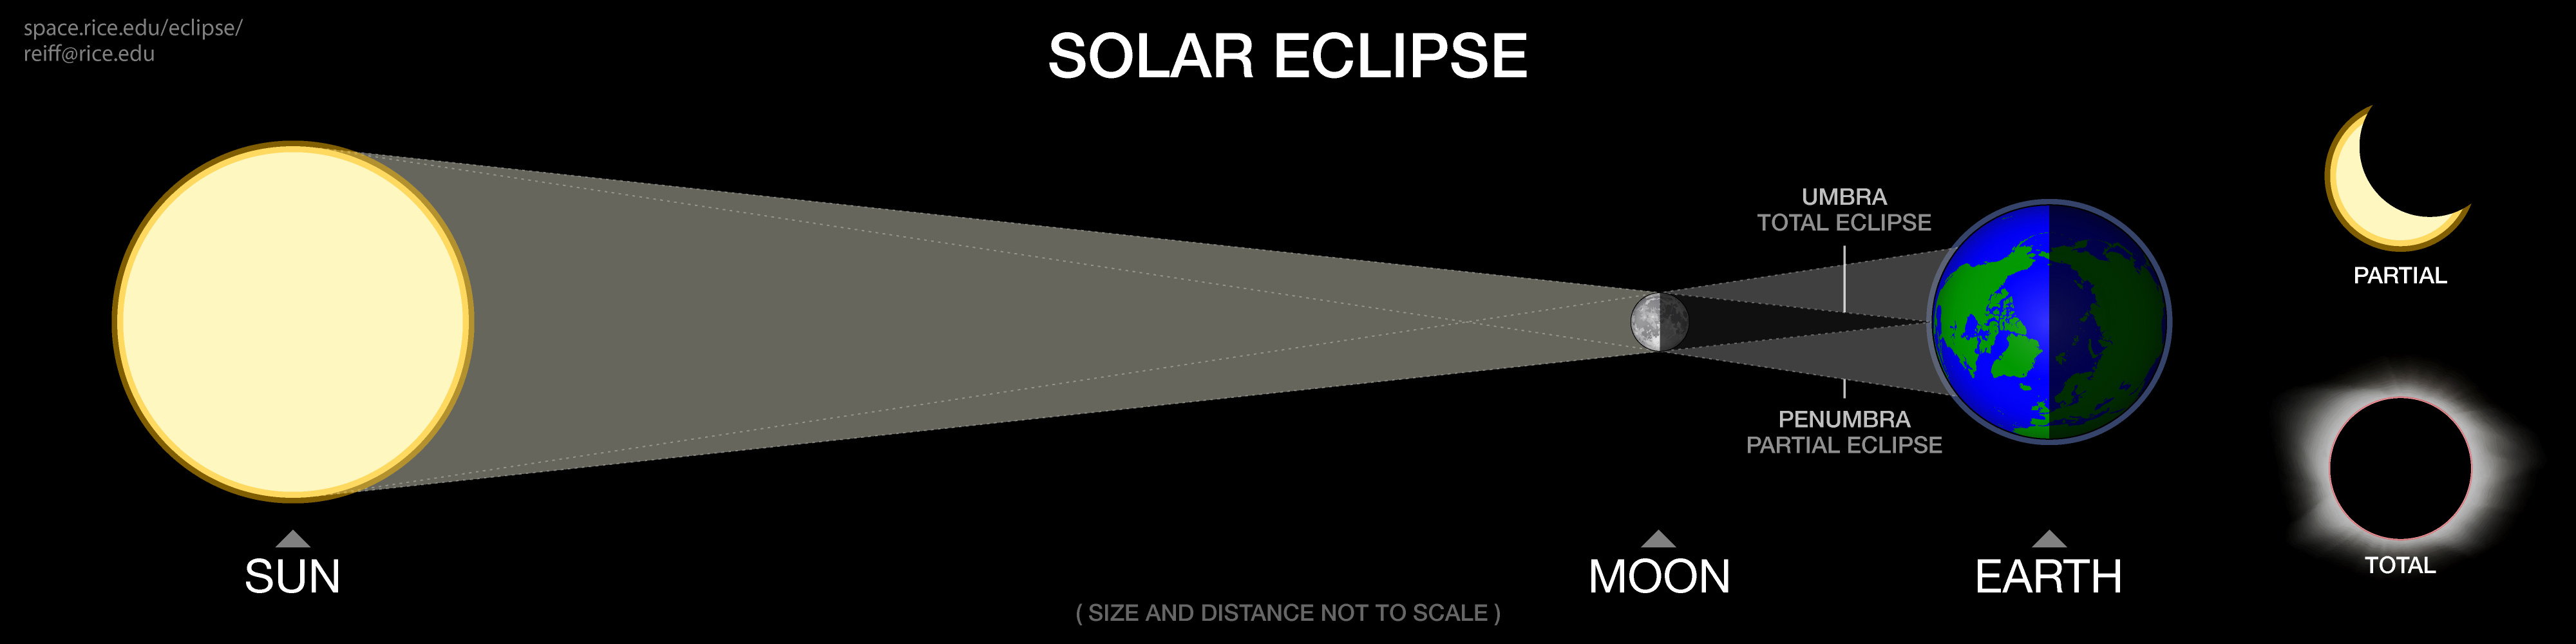 What should I do during a Solar Eclipse?